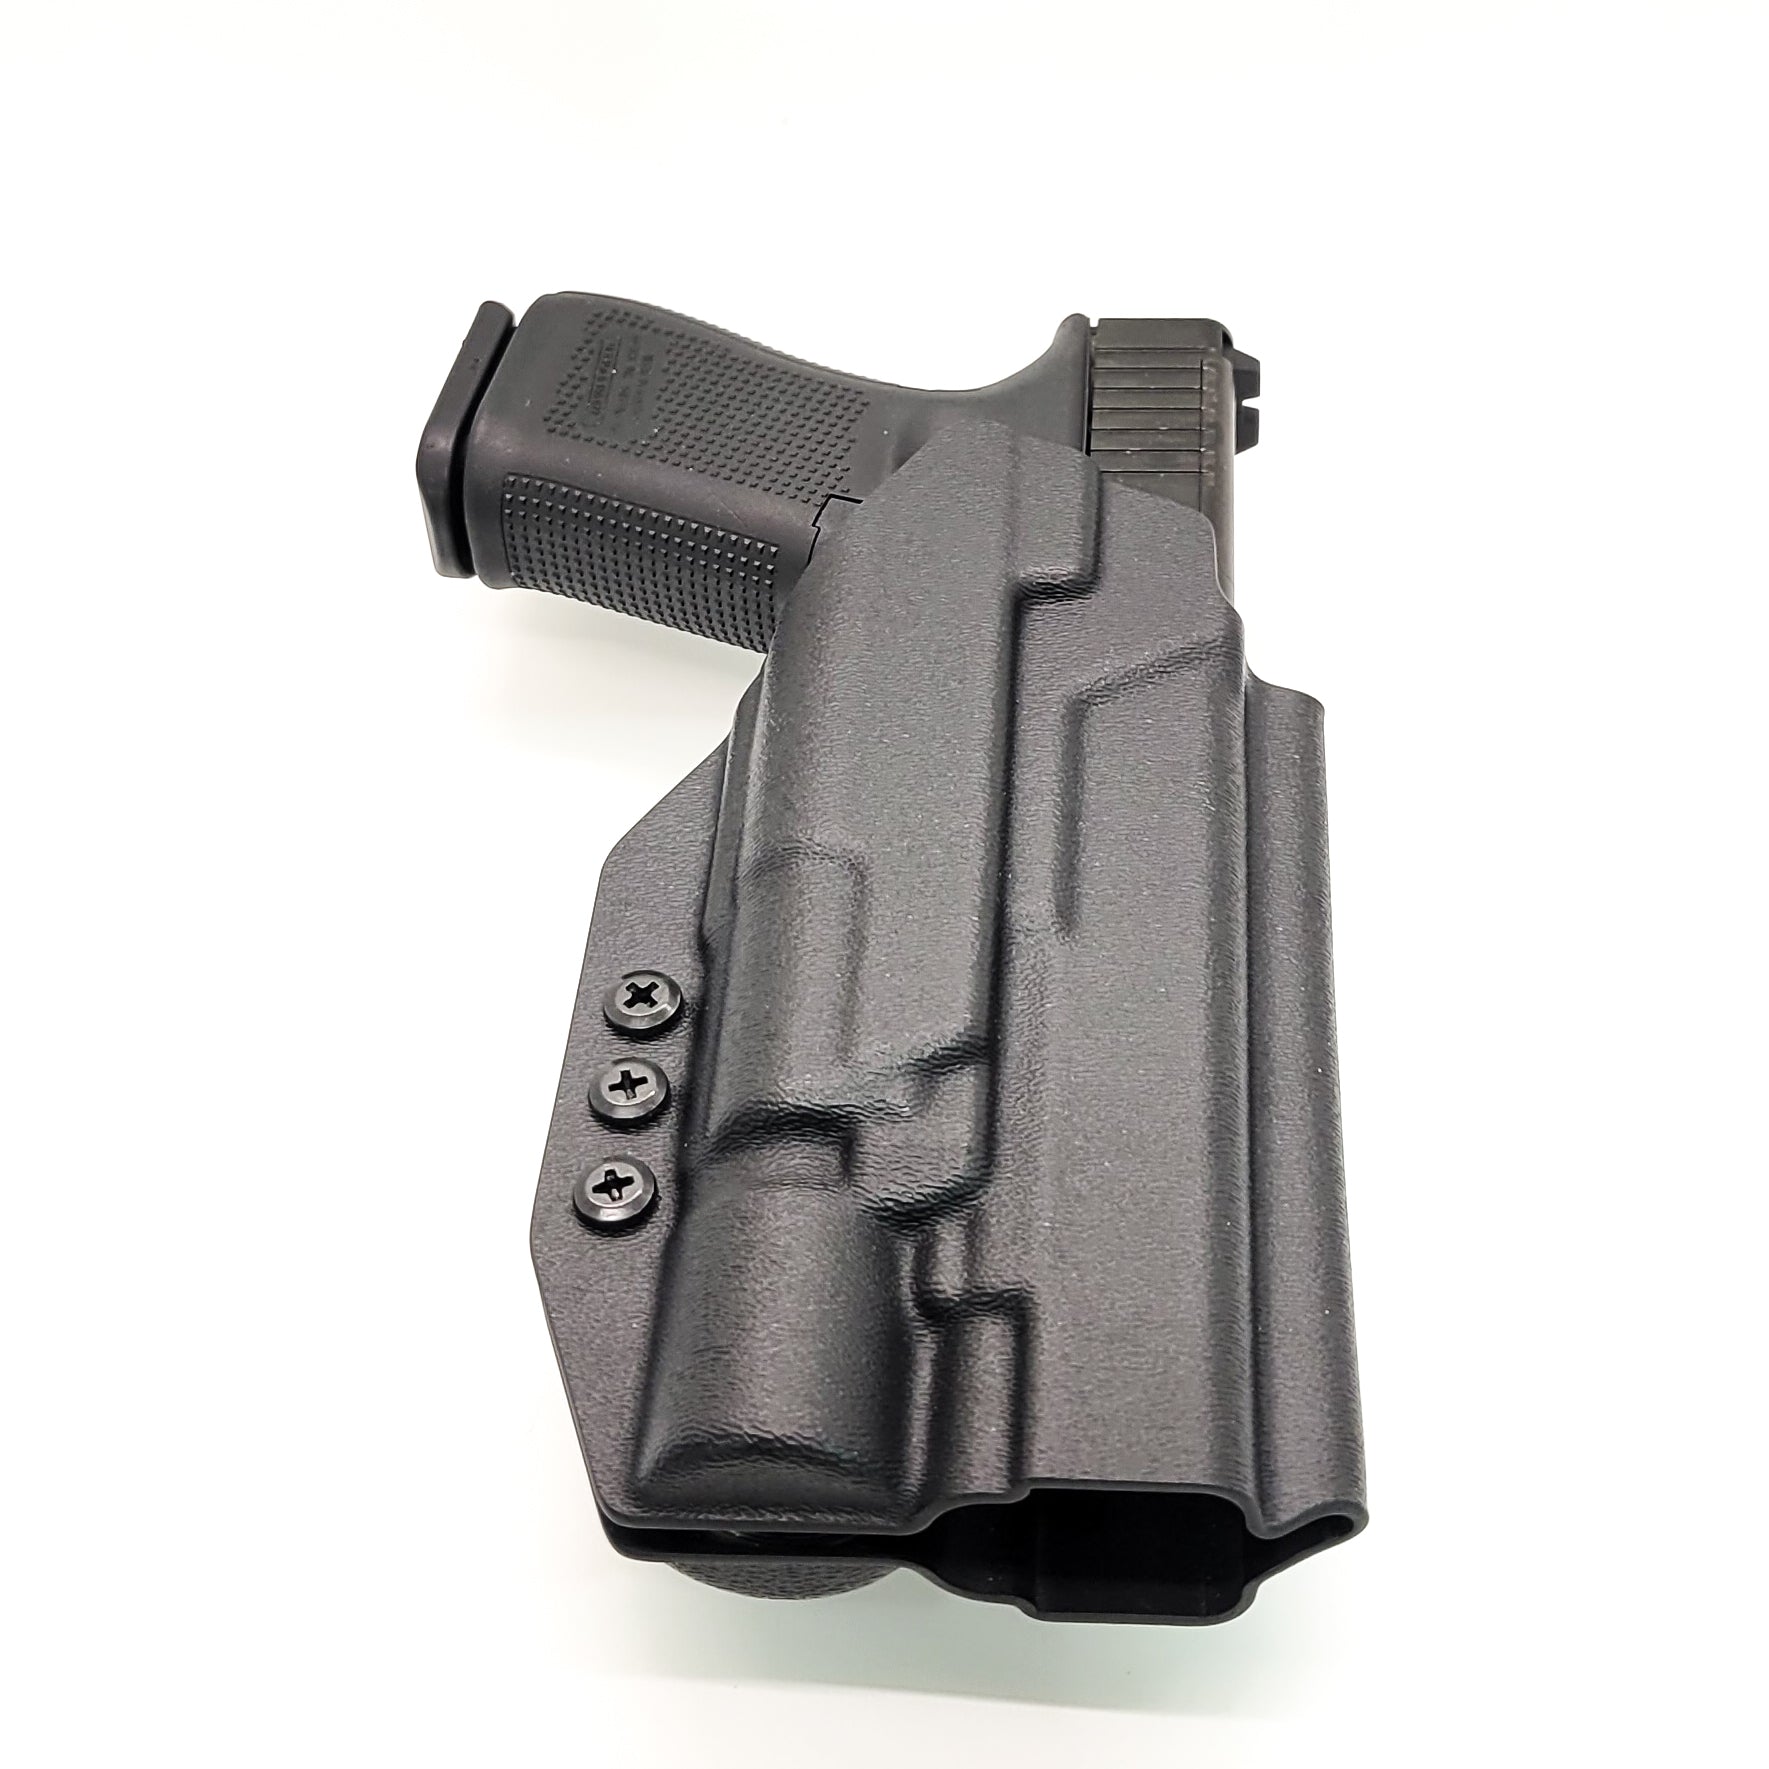 For the best, OWB Outside Waistband Taco Style Holster designed to fit the Glock 34, 17, or 19 Gen 5 pistol with the Surefire X300U A or B X300U-A or X300U-B weapon-mounted light, shop Four Brothers Holsters. Adjustable retention, high sweat guard, profiled for red dot sights. Made in the USA. 